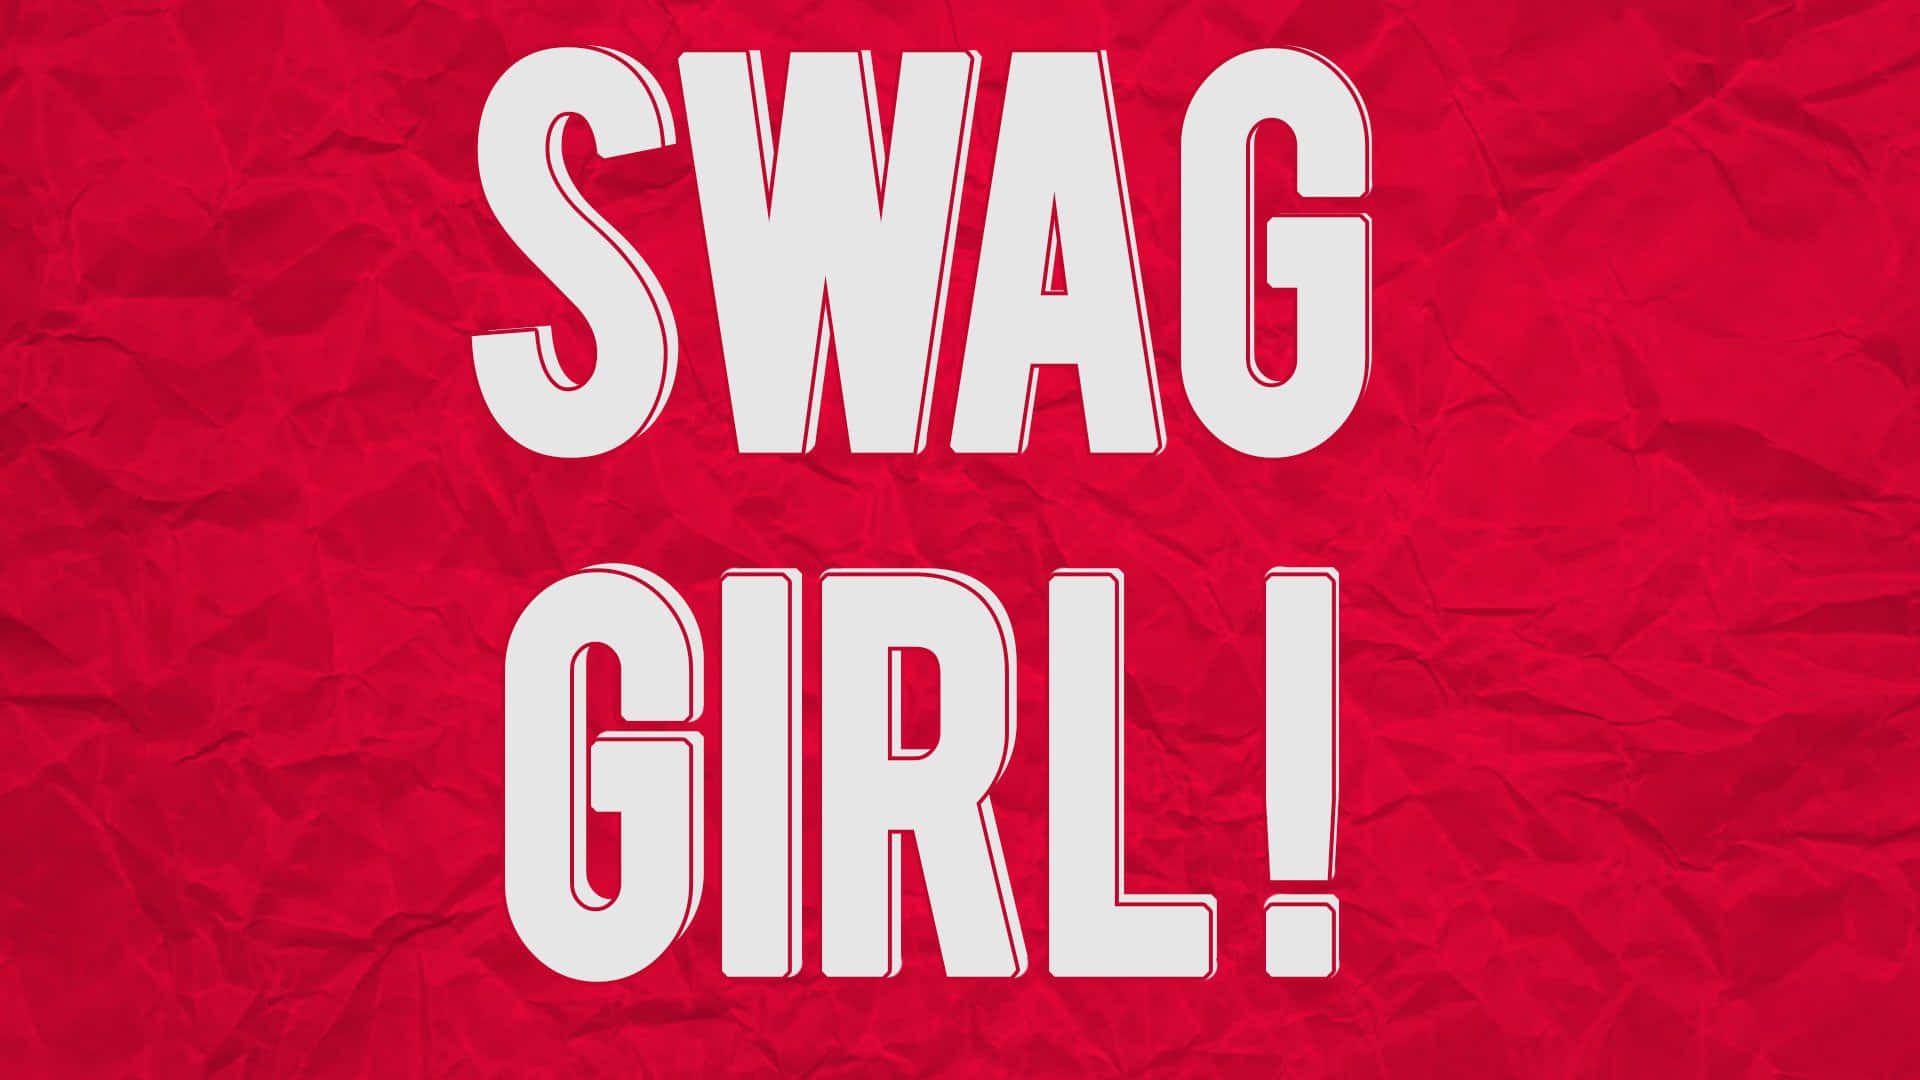 Swag Girl On A Red Background